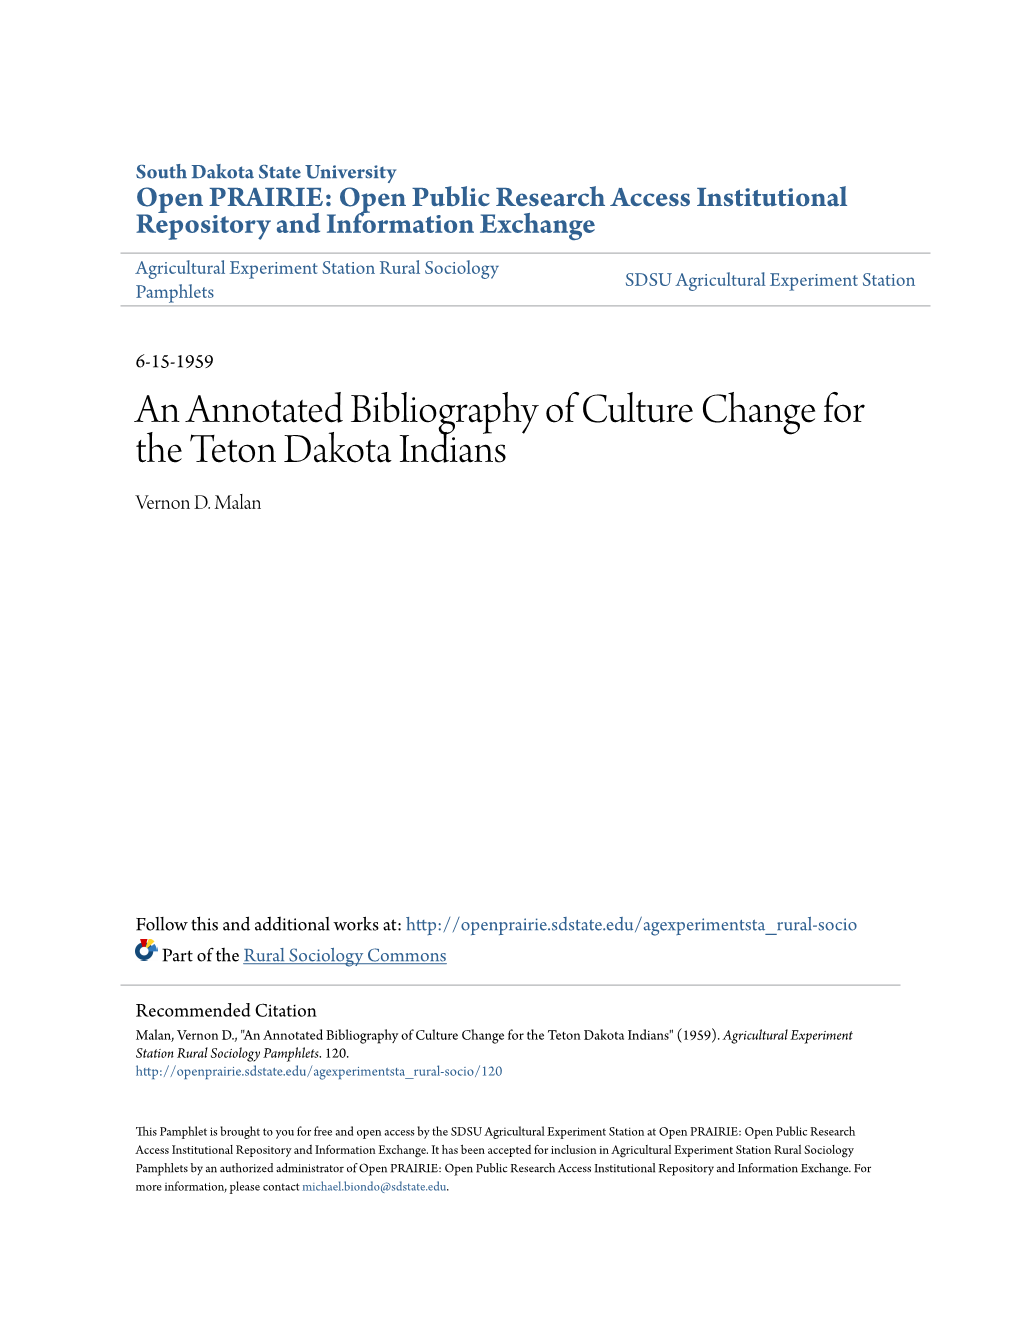 An Annotated Bibliography of Culture Change for the Teton Dakota Indians Vernon D